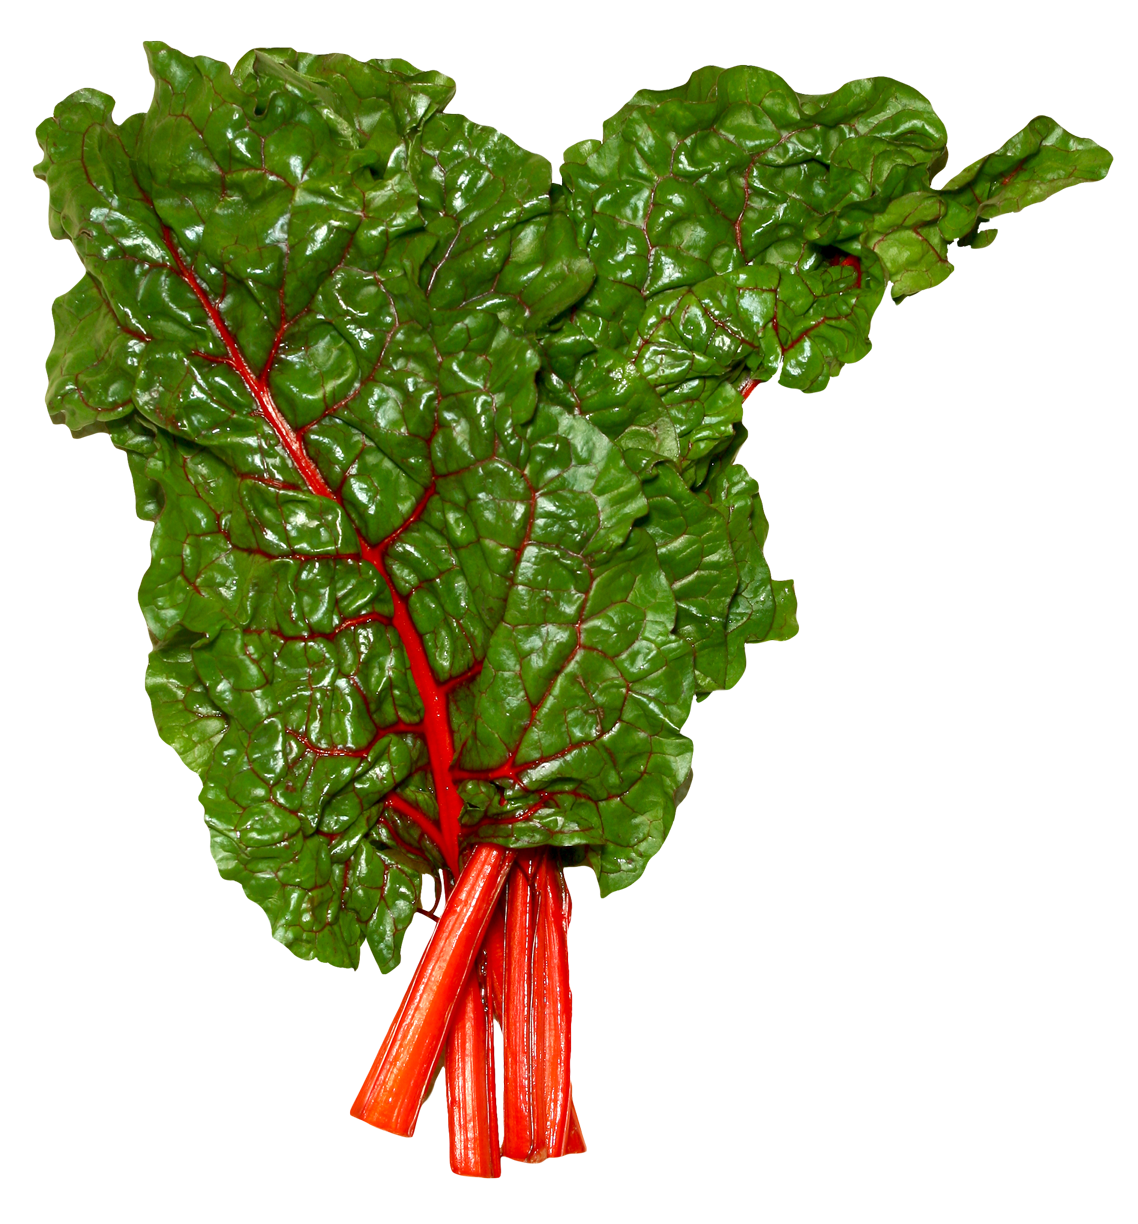 A Leafy Green Leafy Vegetable With Red Veins